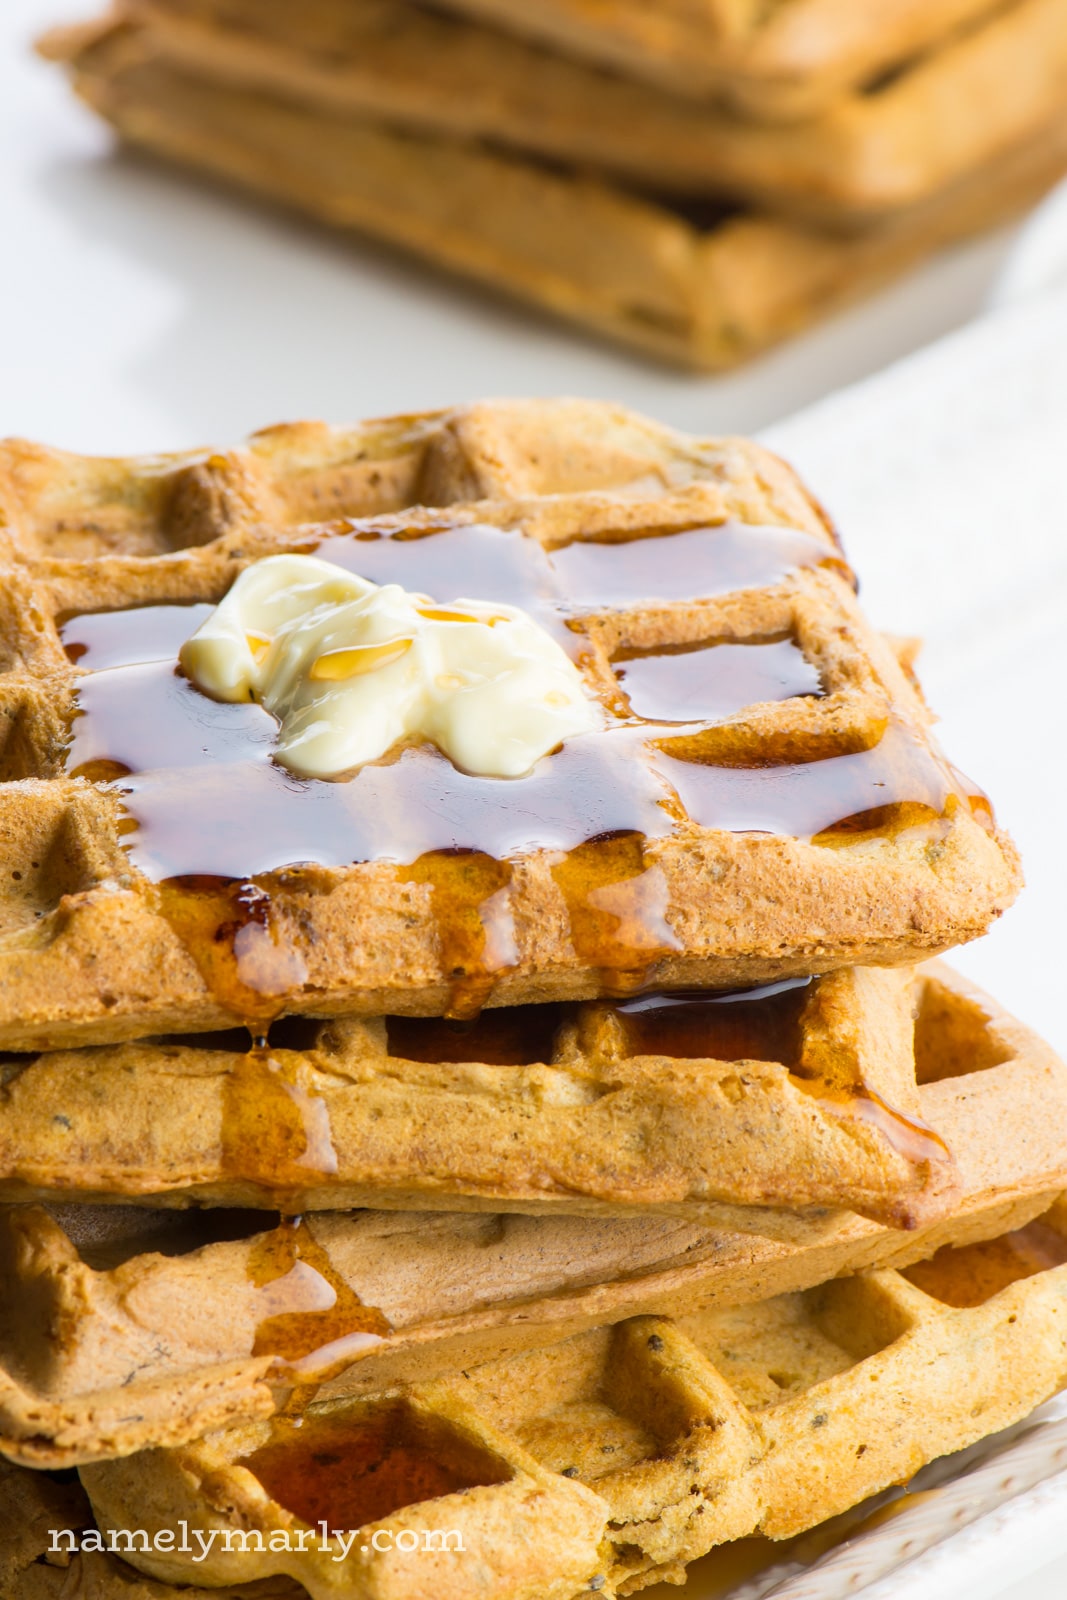 A stack of four whole wheat vegan waffles sit on a plate. There's melted vegan butter on the top waffle and it has maple syrup pooled in the waffle impressions on the top and oozing over the side. There are additional waffles in the background.